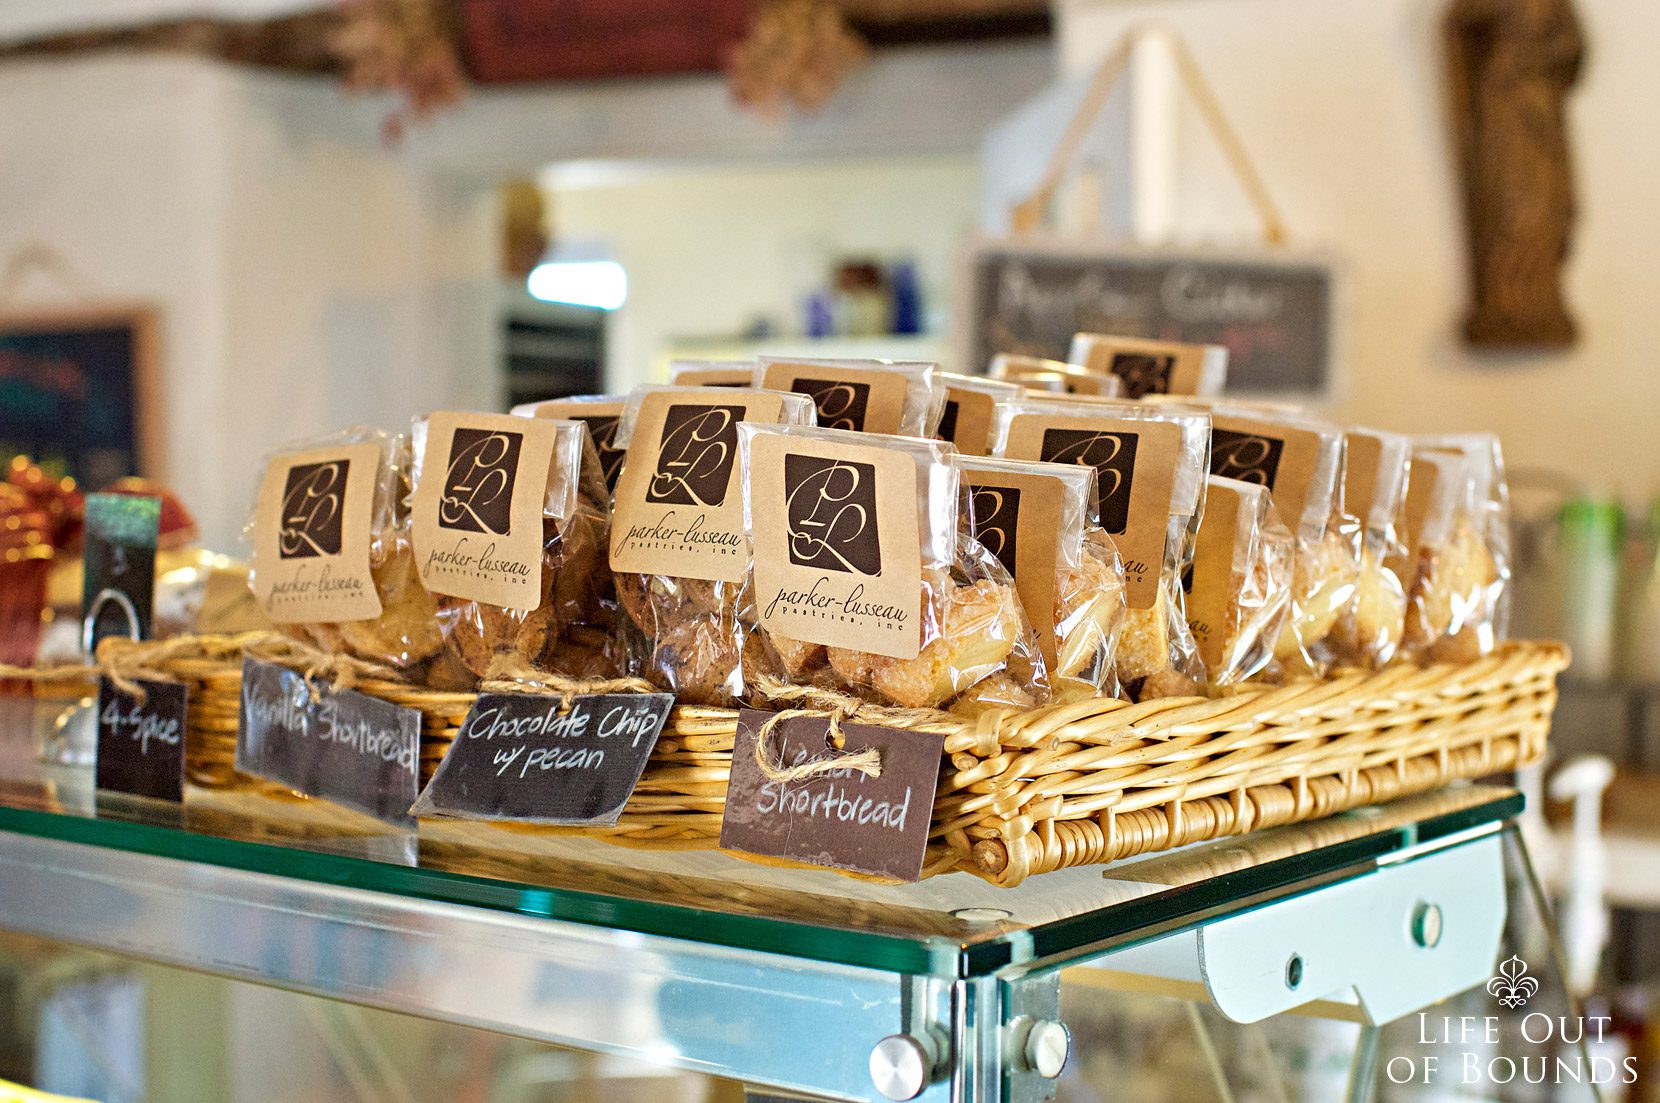 Assorted-cookies-by-Parker-Lusseau-bakery-and-cafe-in-Monterey-California